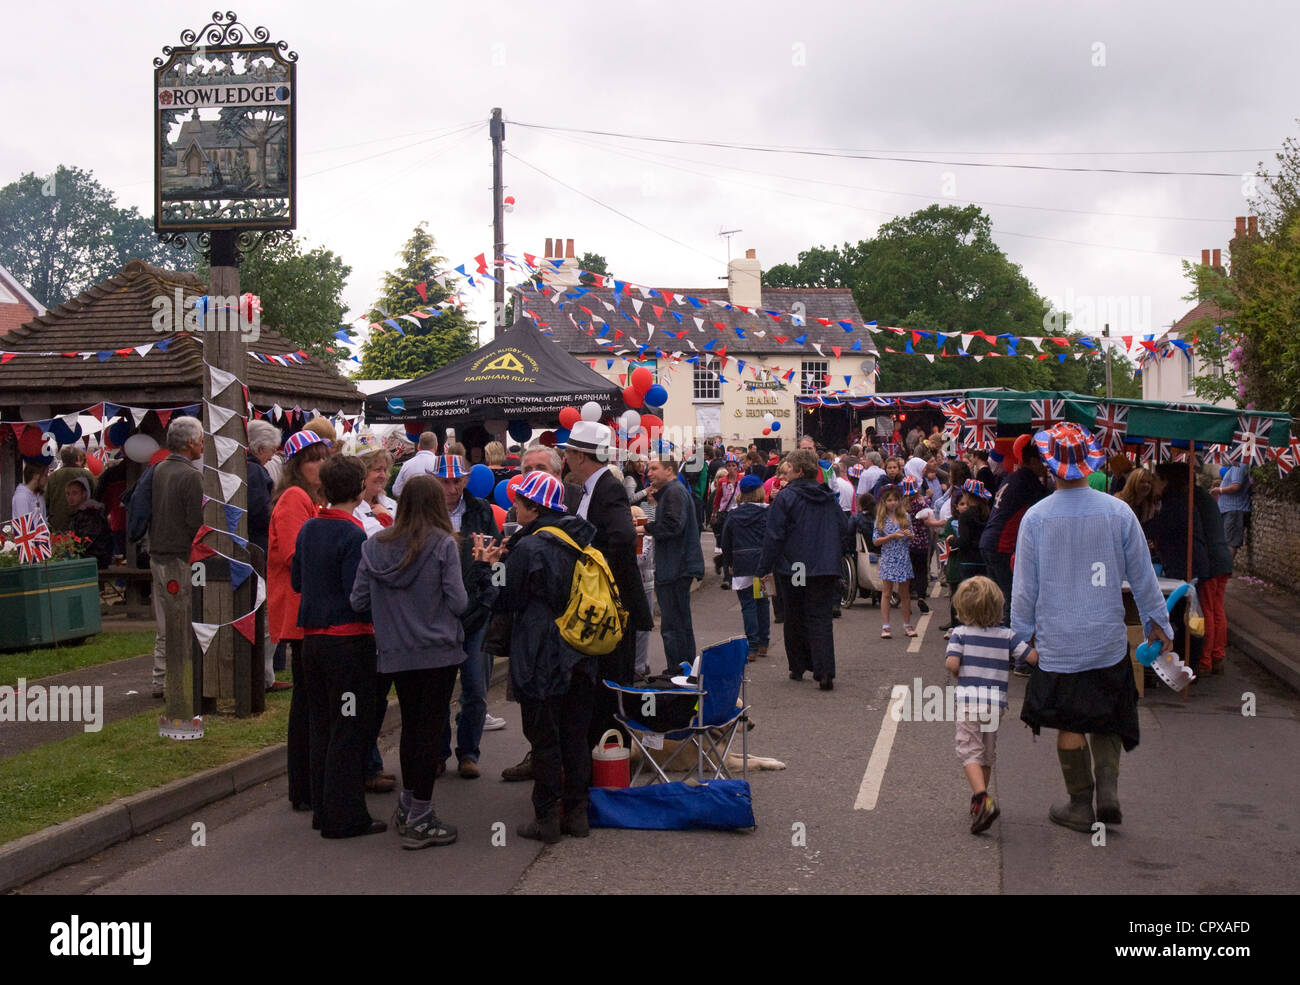 Street party in progress at the celebrations for the Queen's Diamond Jubilee, Rowledge Village, ENGLAND. Stock Photo